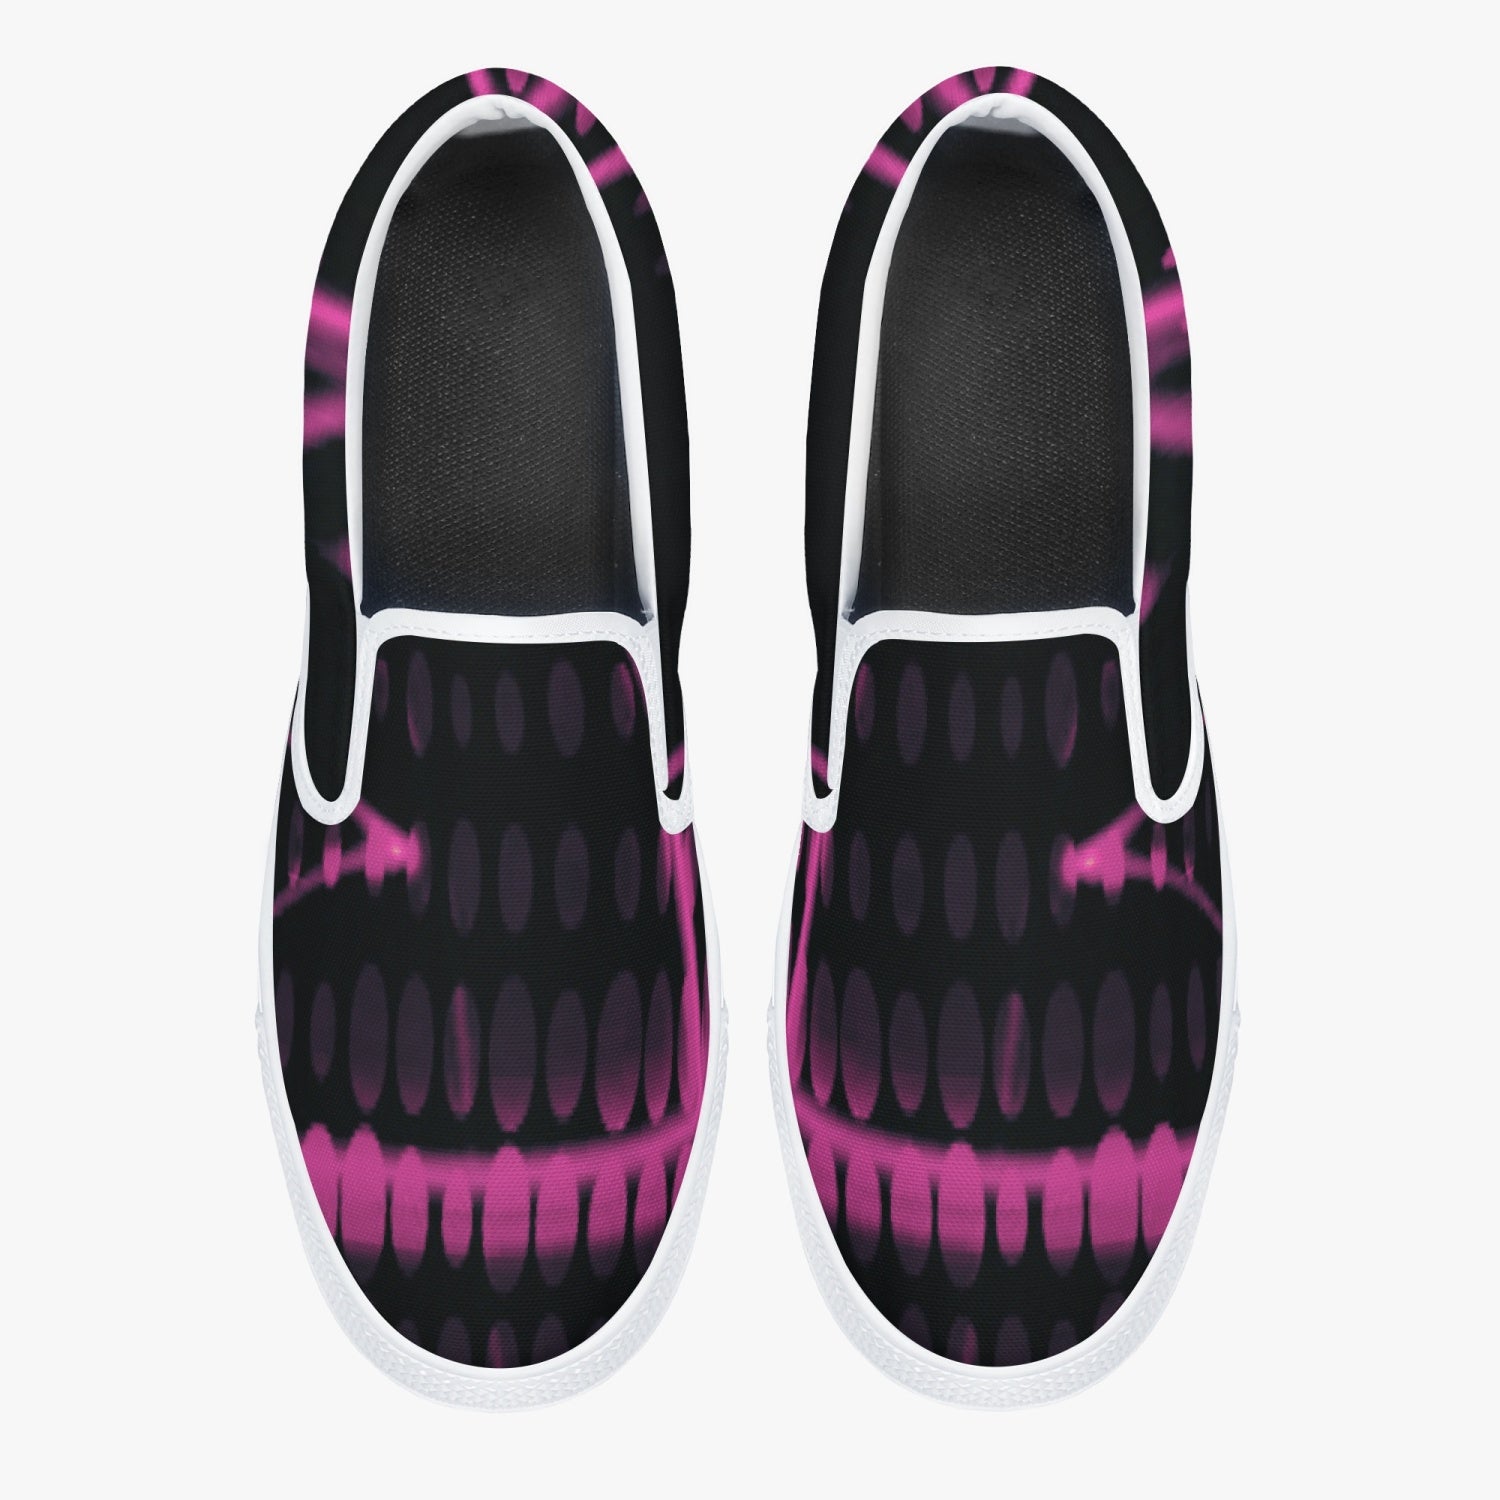 Officially Sexy Pink Laser Classic Slip-On Shoes - White/Black